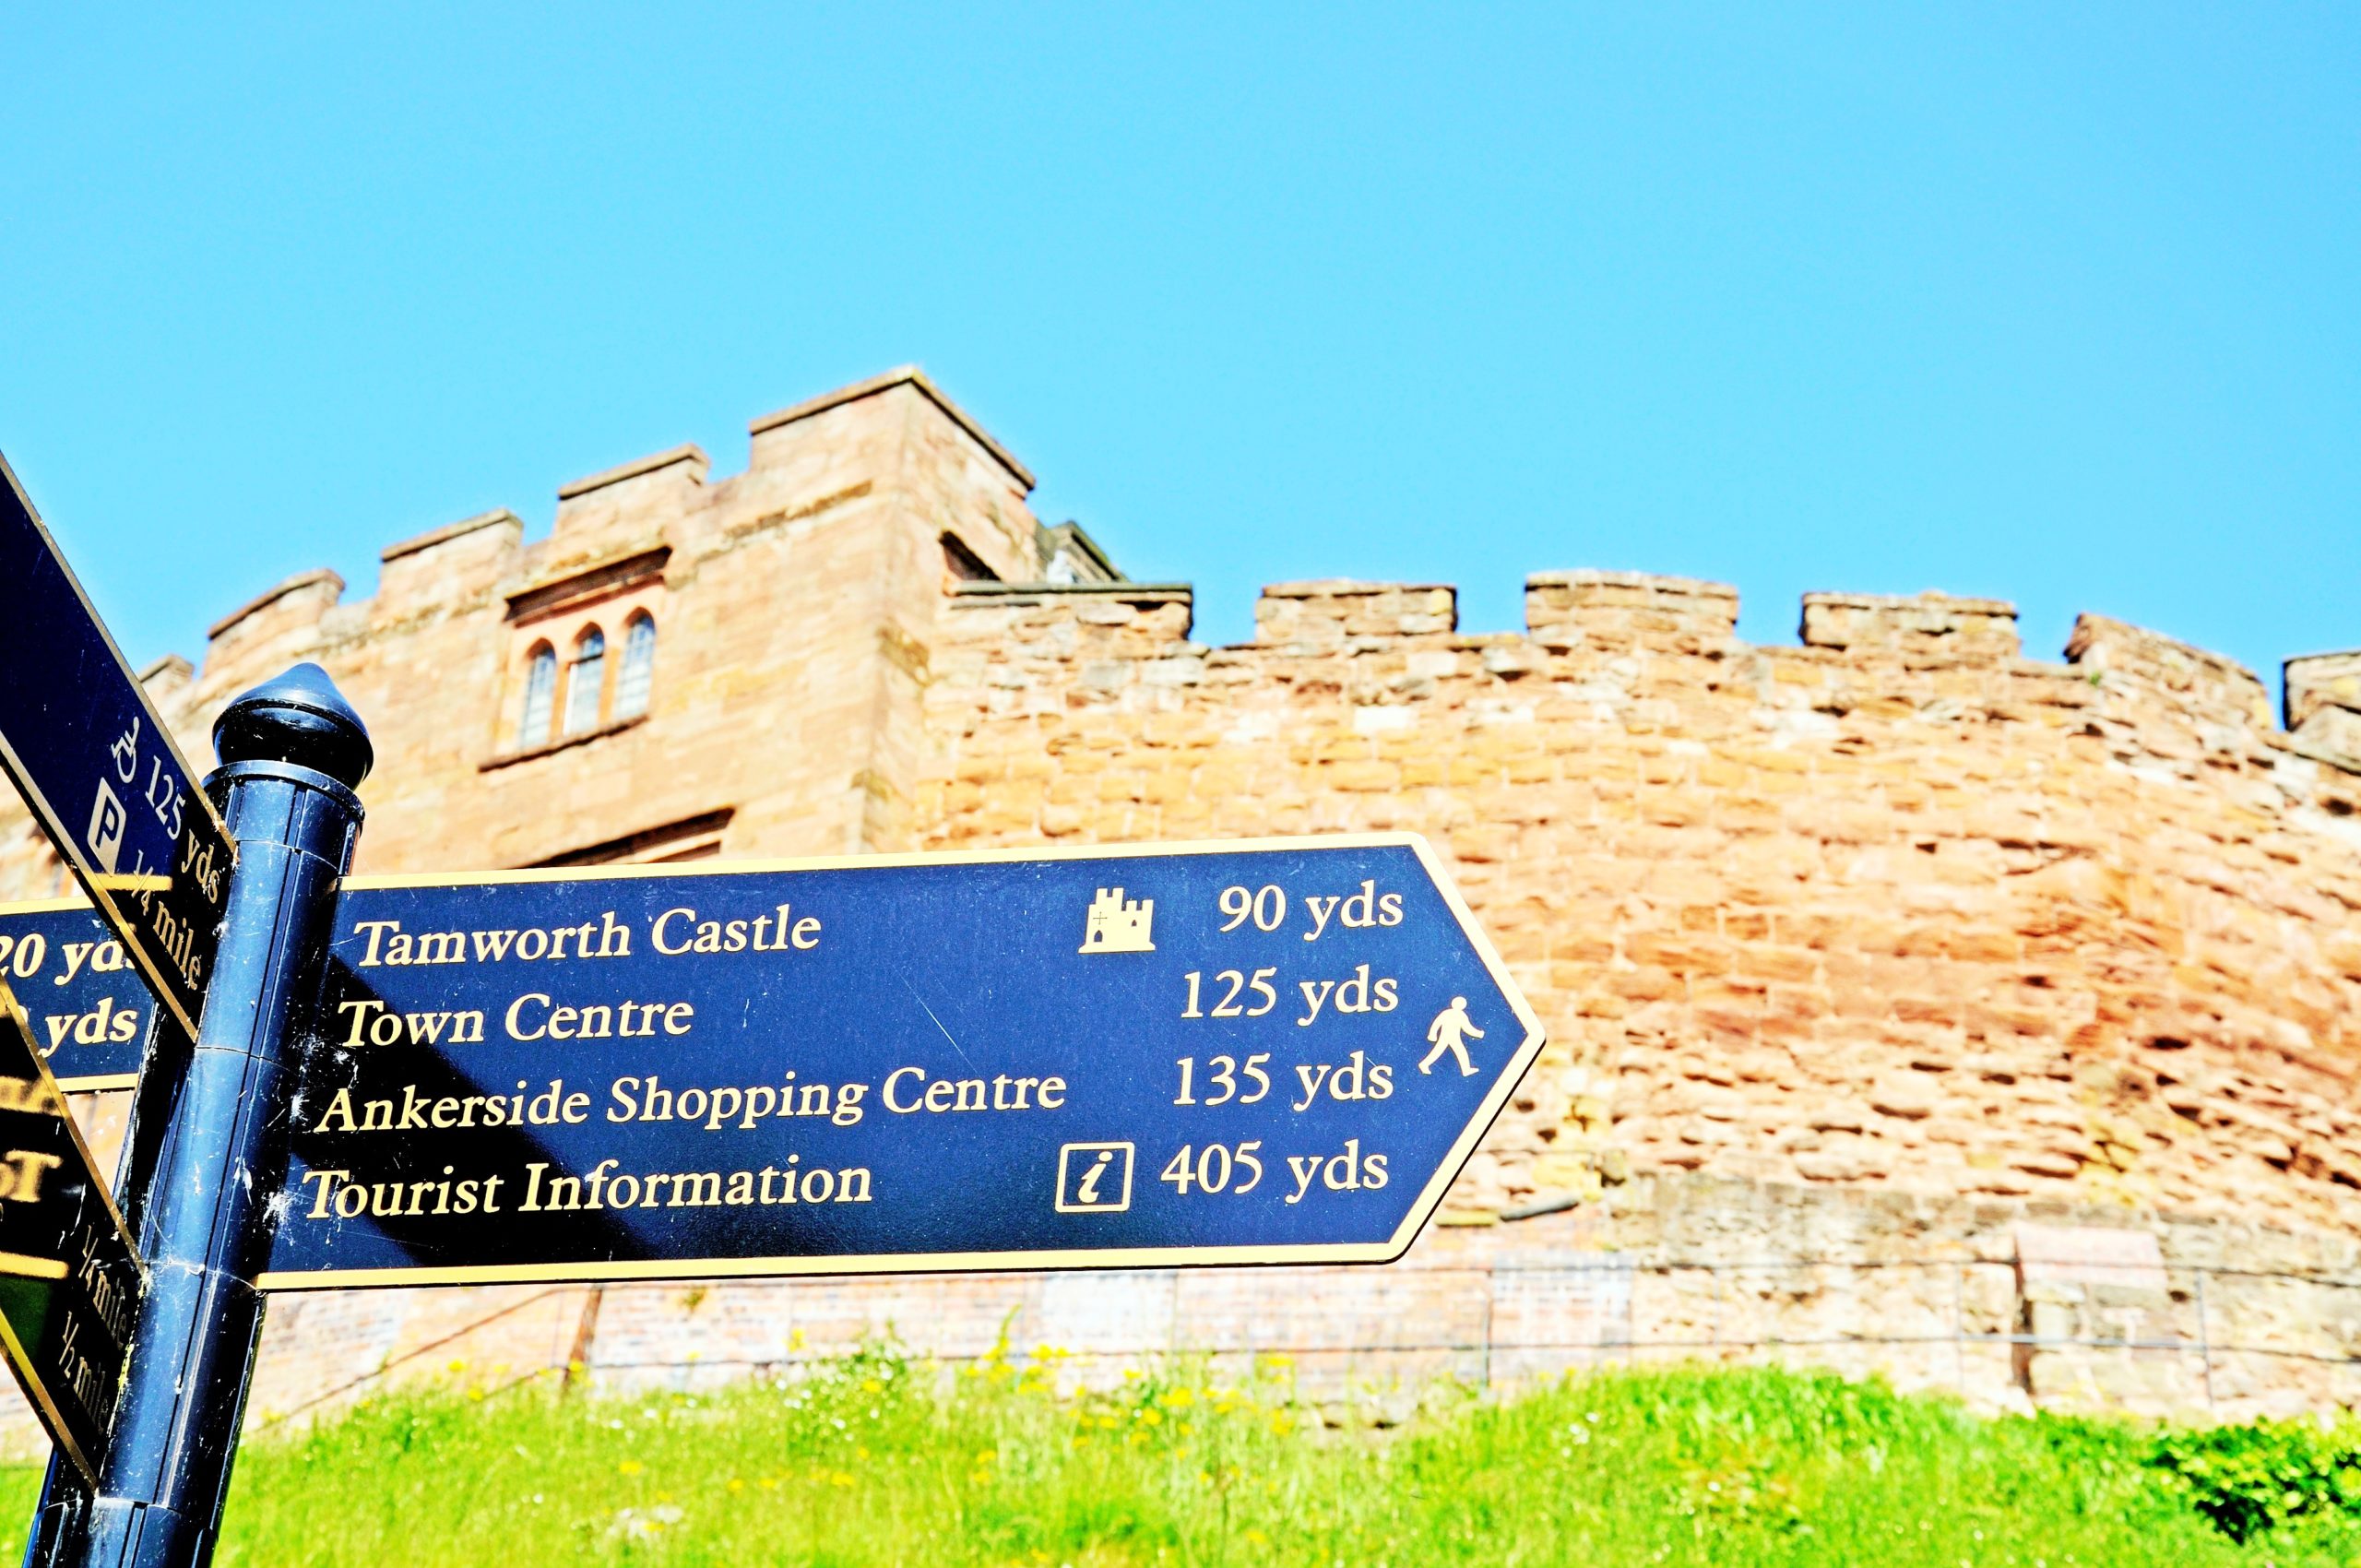 <img src="directions.jpg" alt="directions to beautiful tamworth castle"/> 